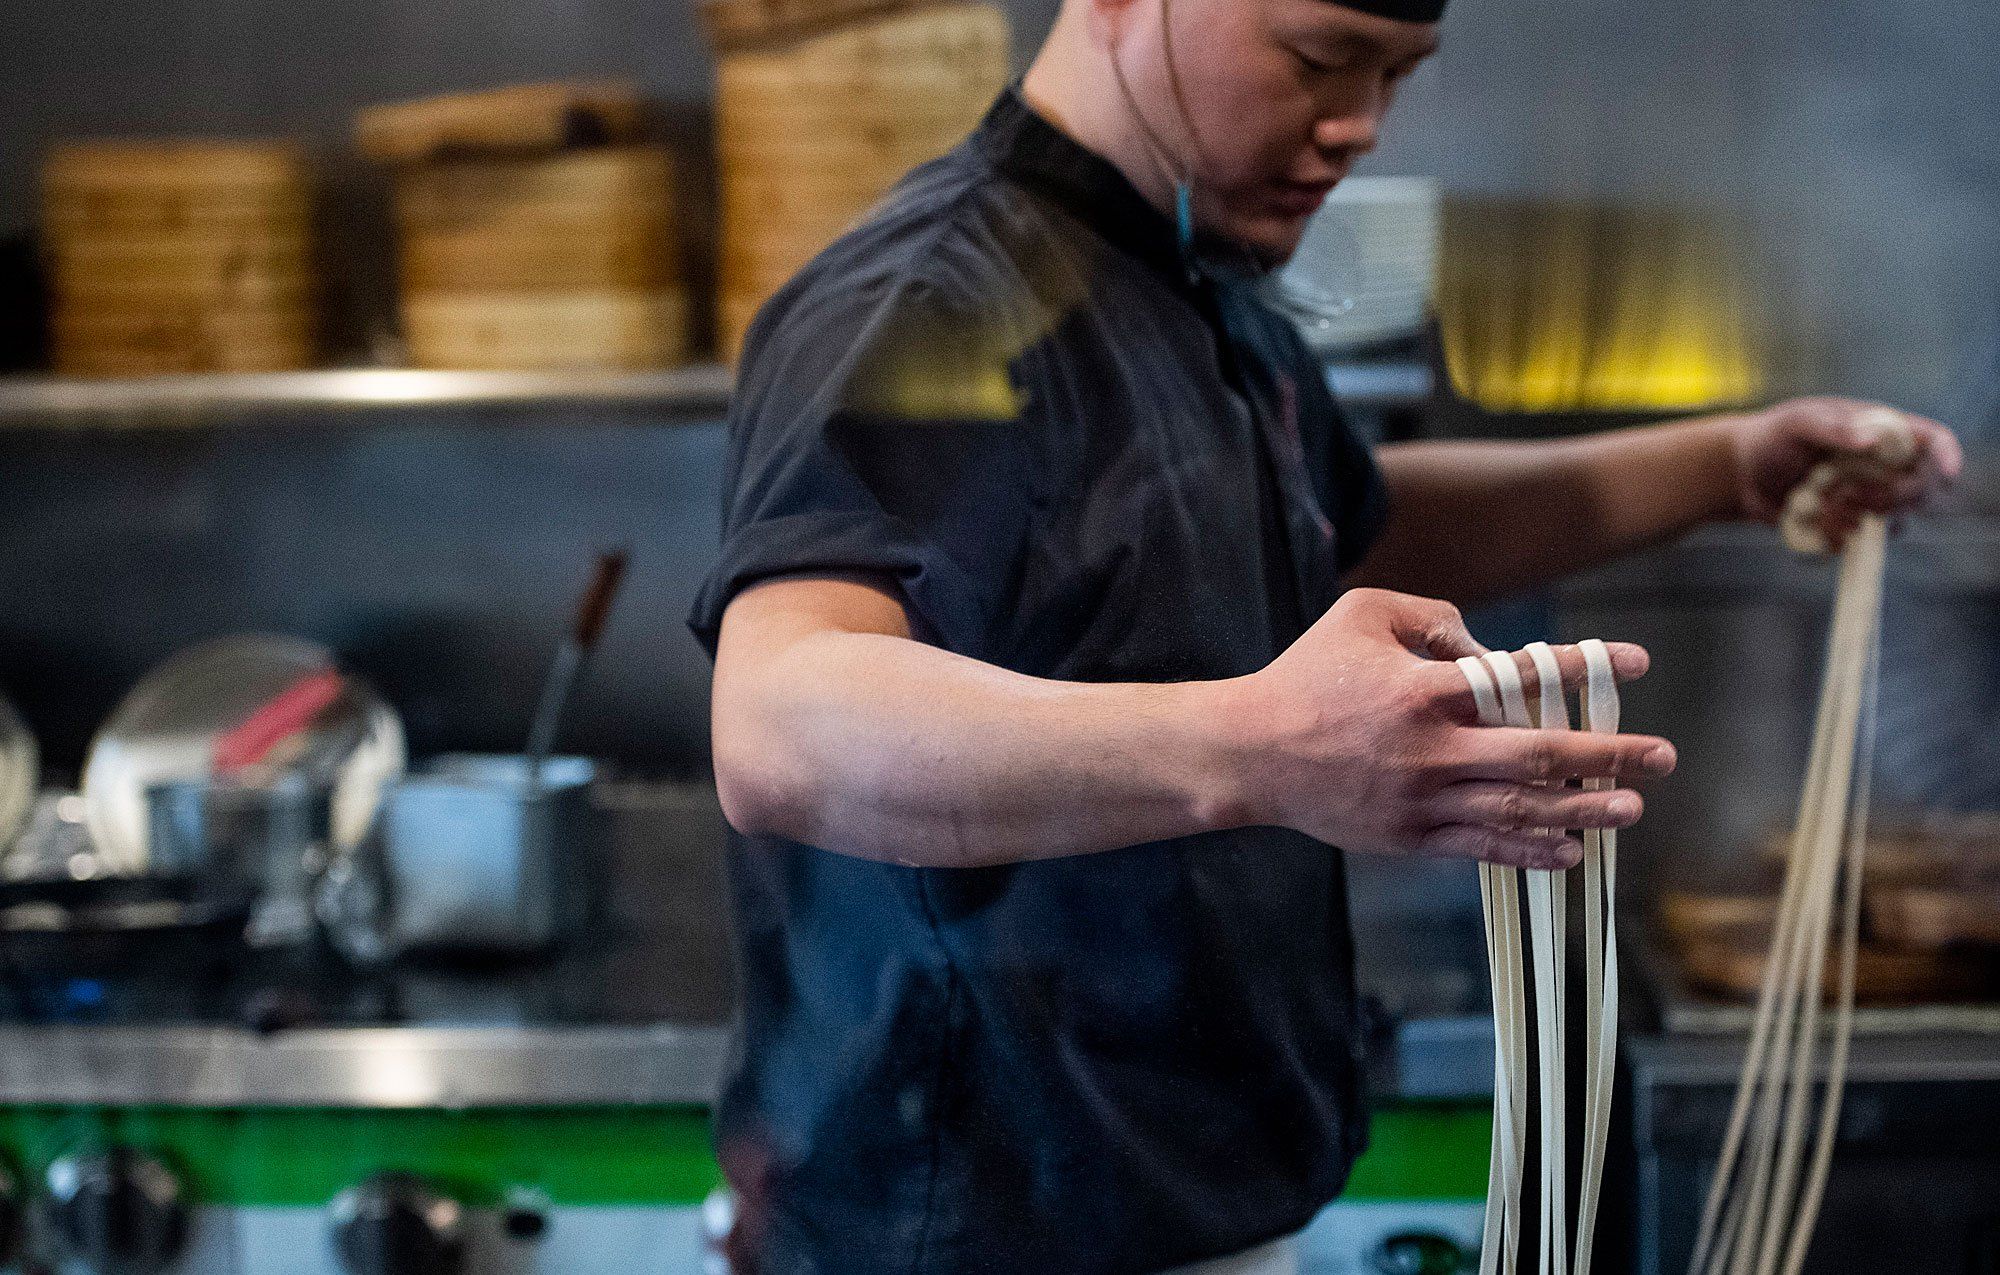 Tony Mao makes noodles at Everyday Noodles in Squirrel Hill. Image by Stephanie Chambers. United States, 2018. 